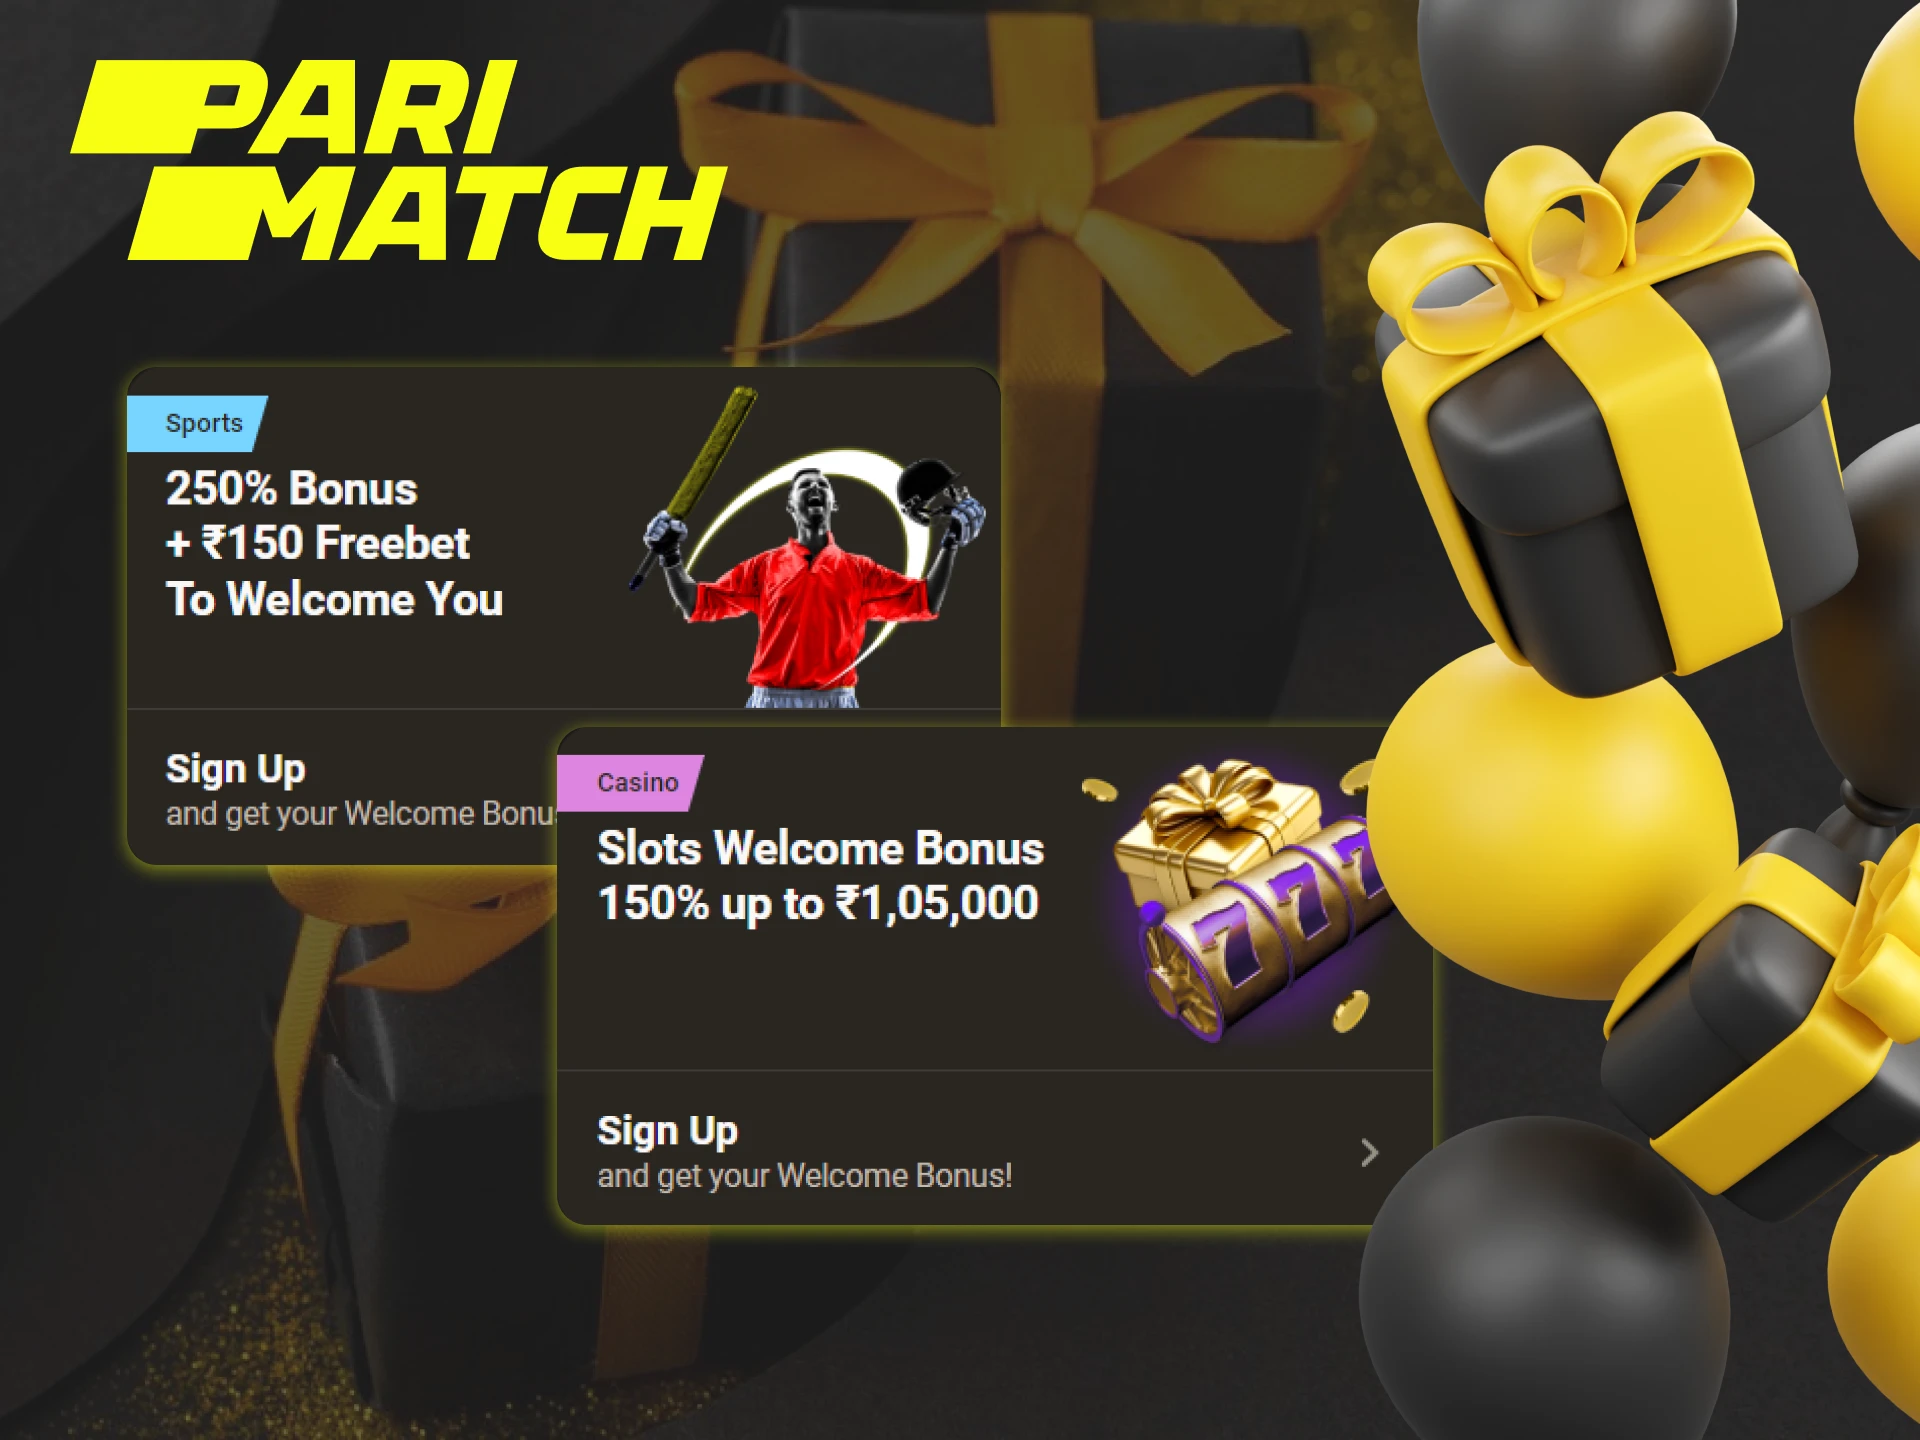 Parimatch offers lucrative welcome bonuses for sports betting and casinos.